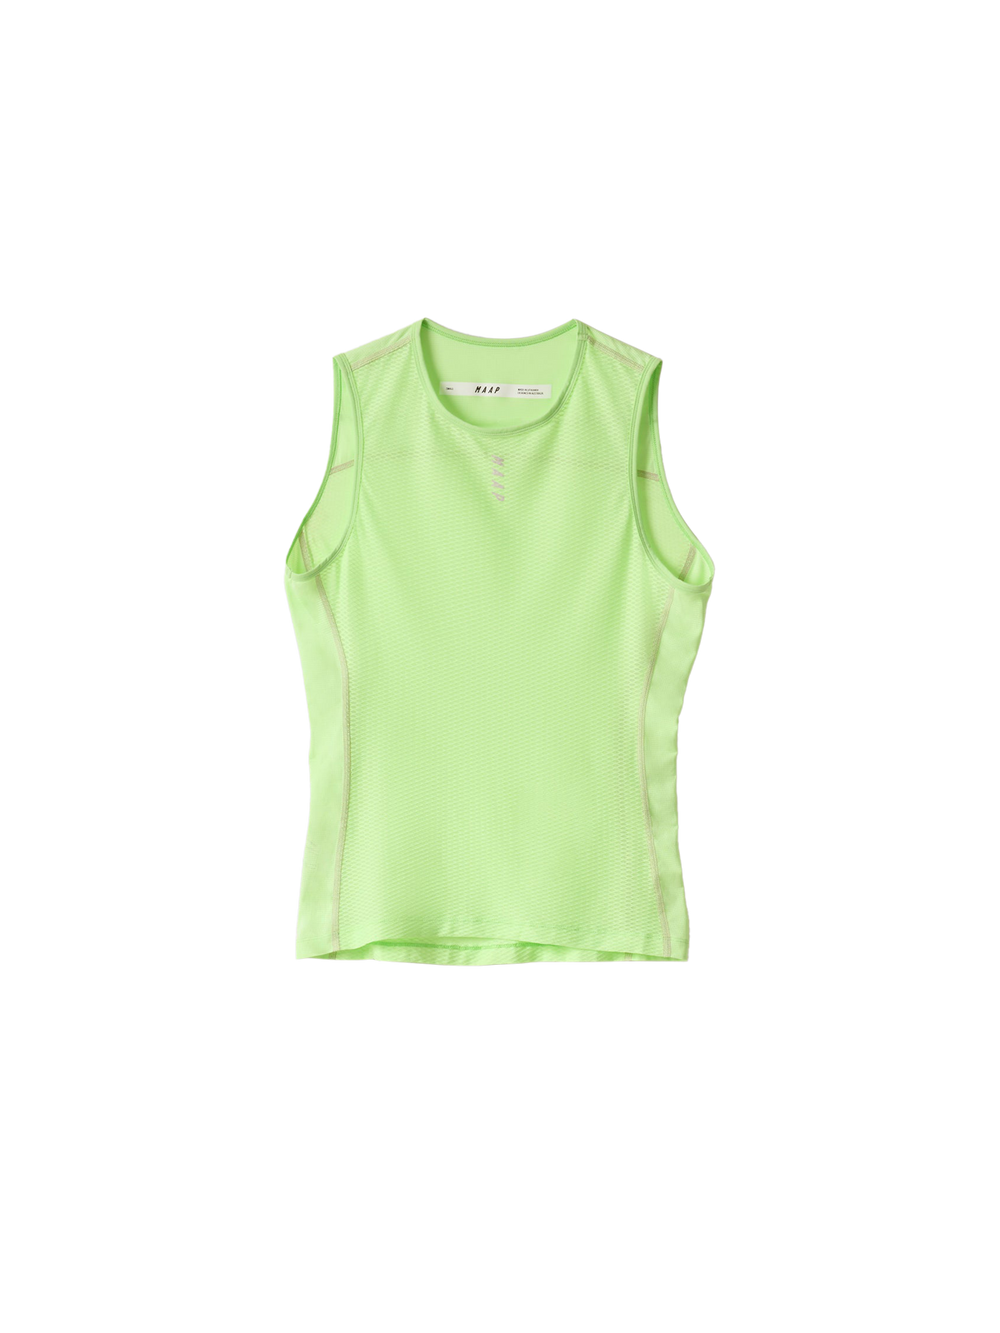 Product Image for Women's Team Base Layer